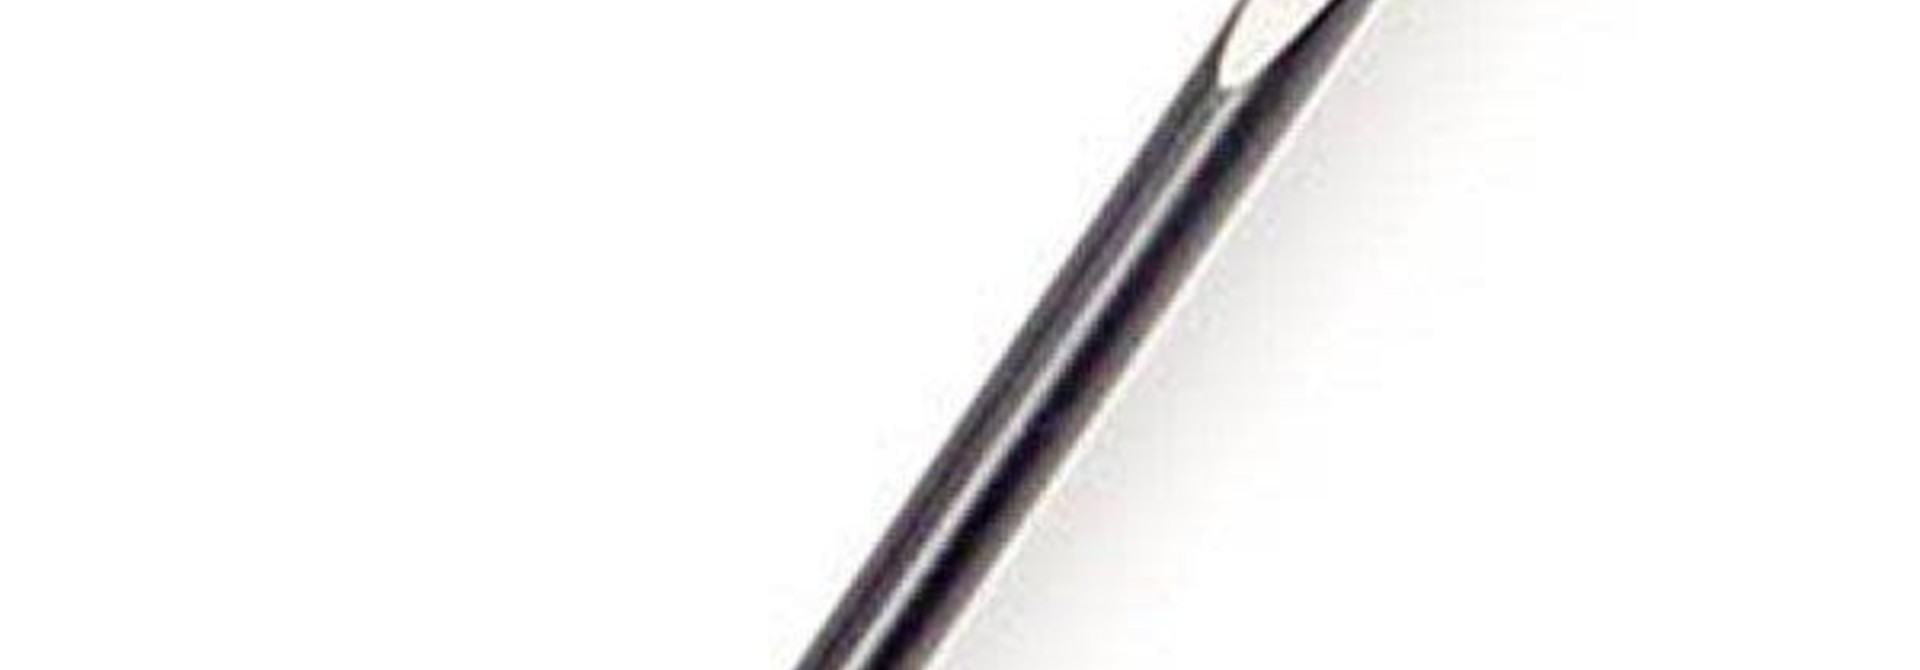 Slotted Screwdriver Replacement Tip 5.8 X 100 mm Spc. H155831